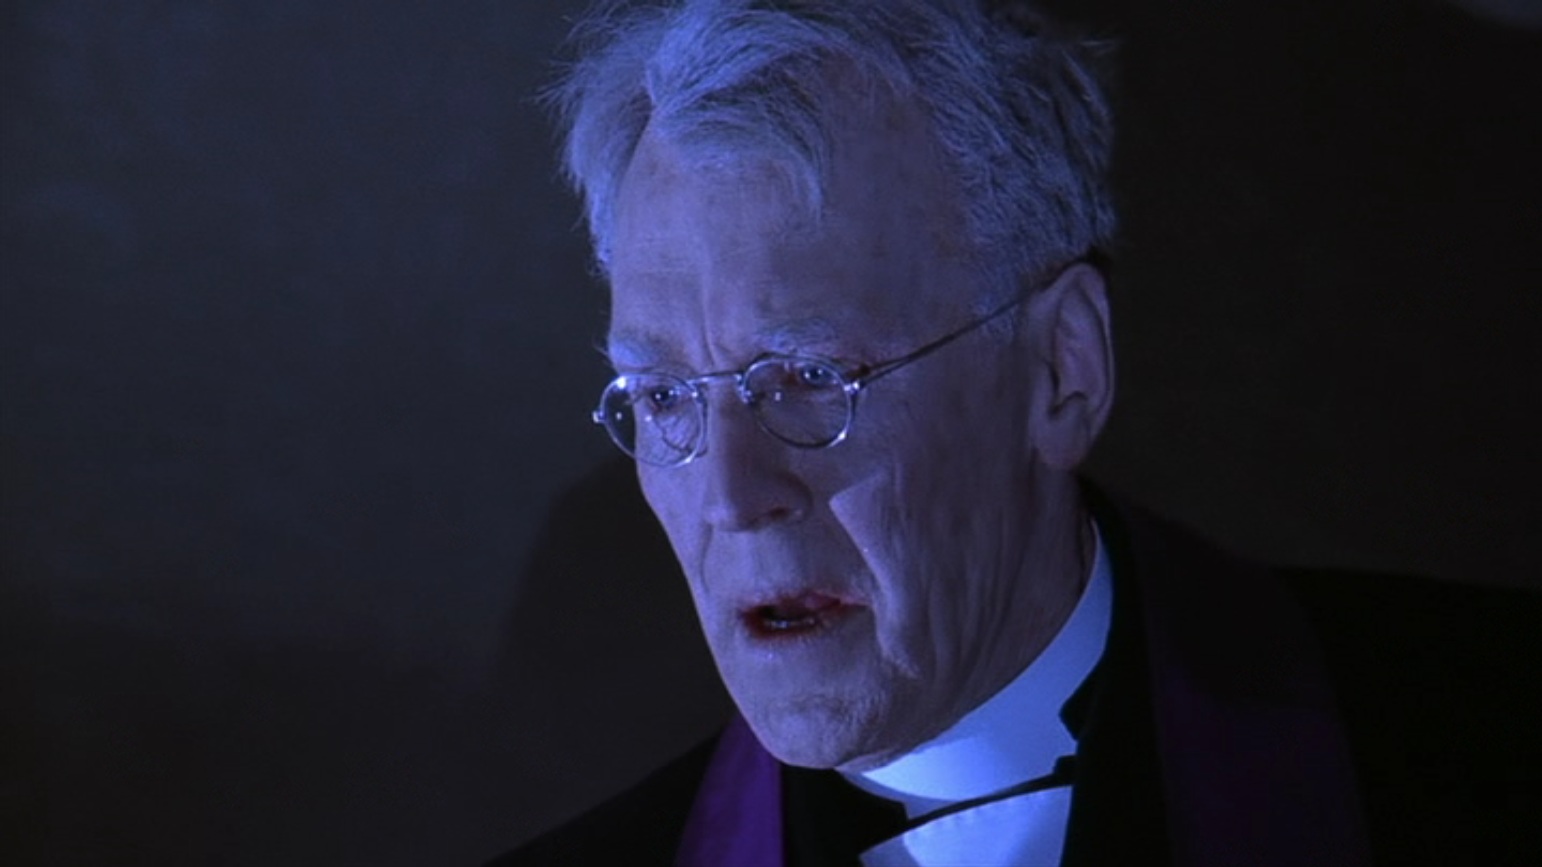 Max Von Sydow played the priest in The Exorcist